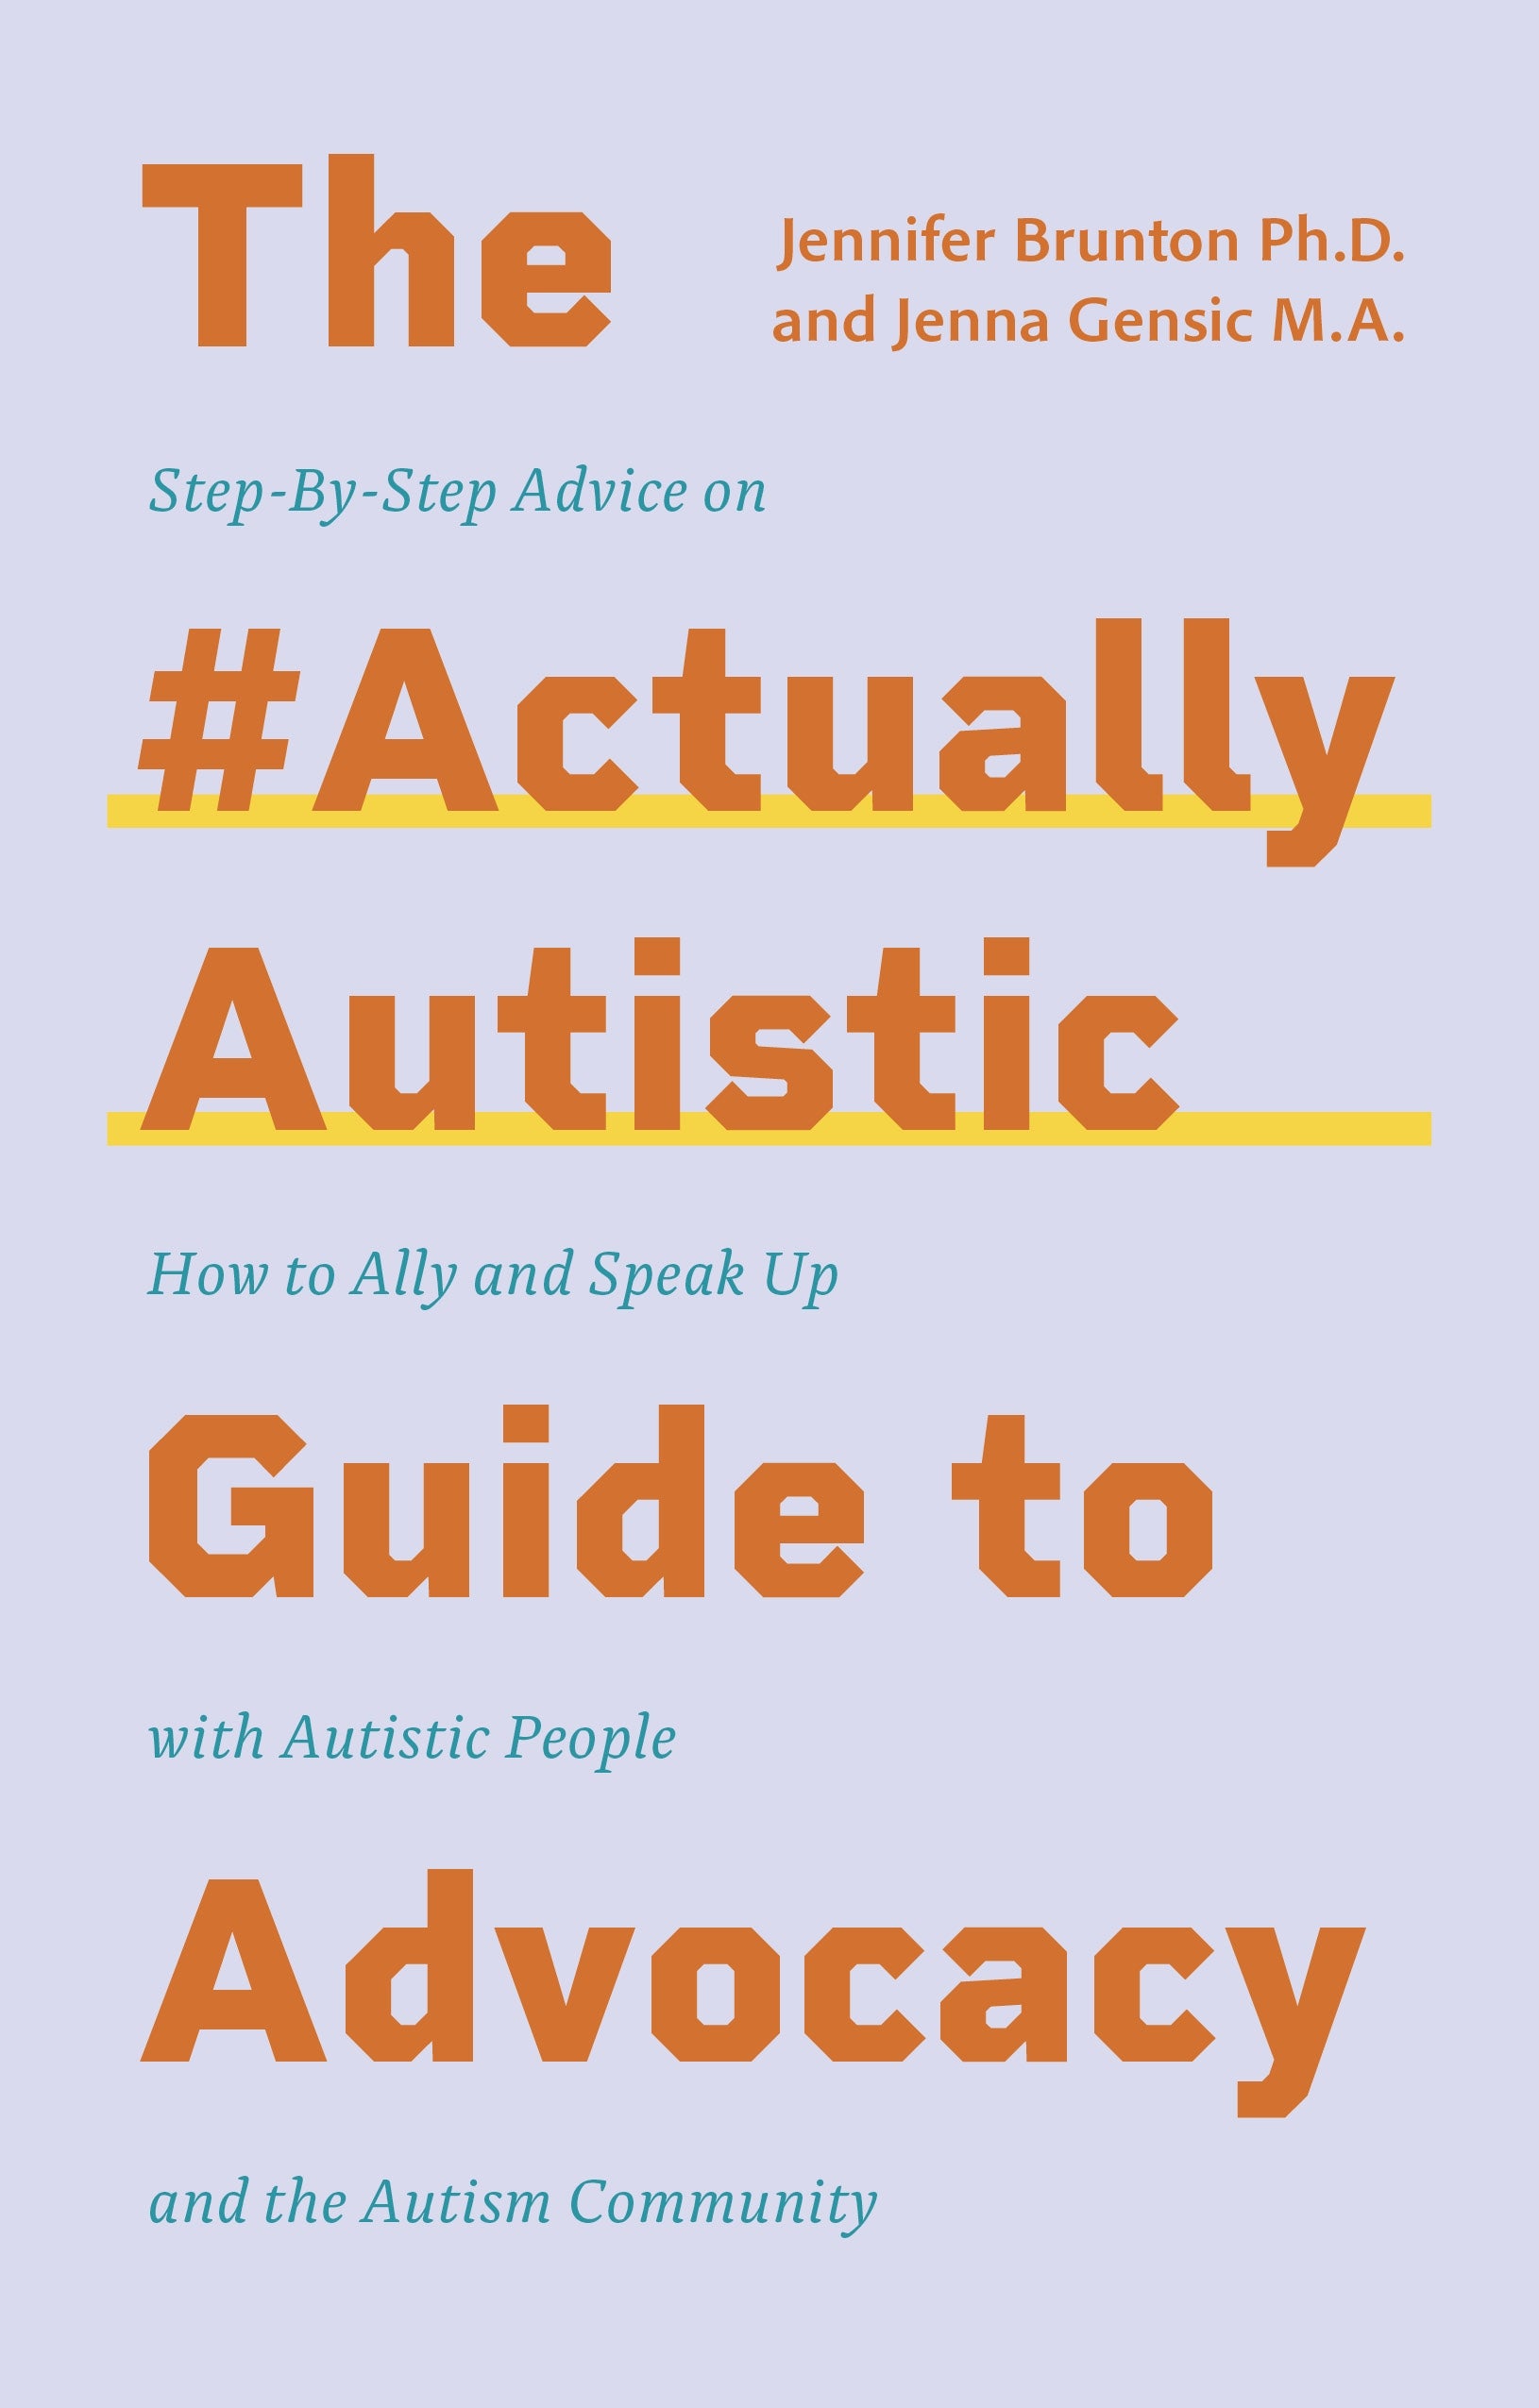 The #ActuallyAutistic Guide to Advocacy by Jenna Gensic, Jennifer Brunton